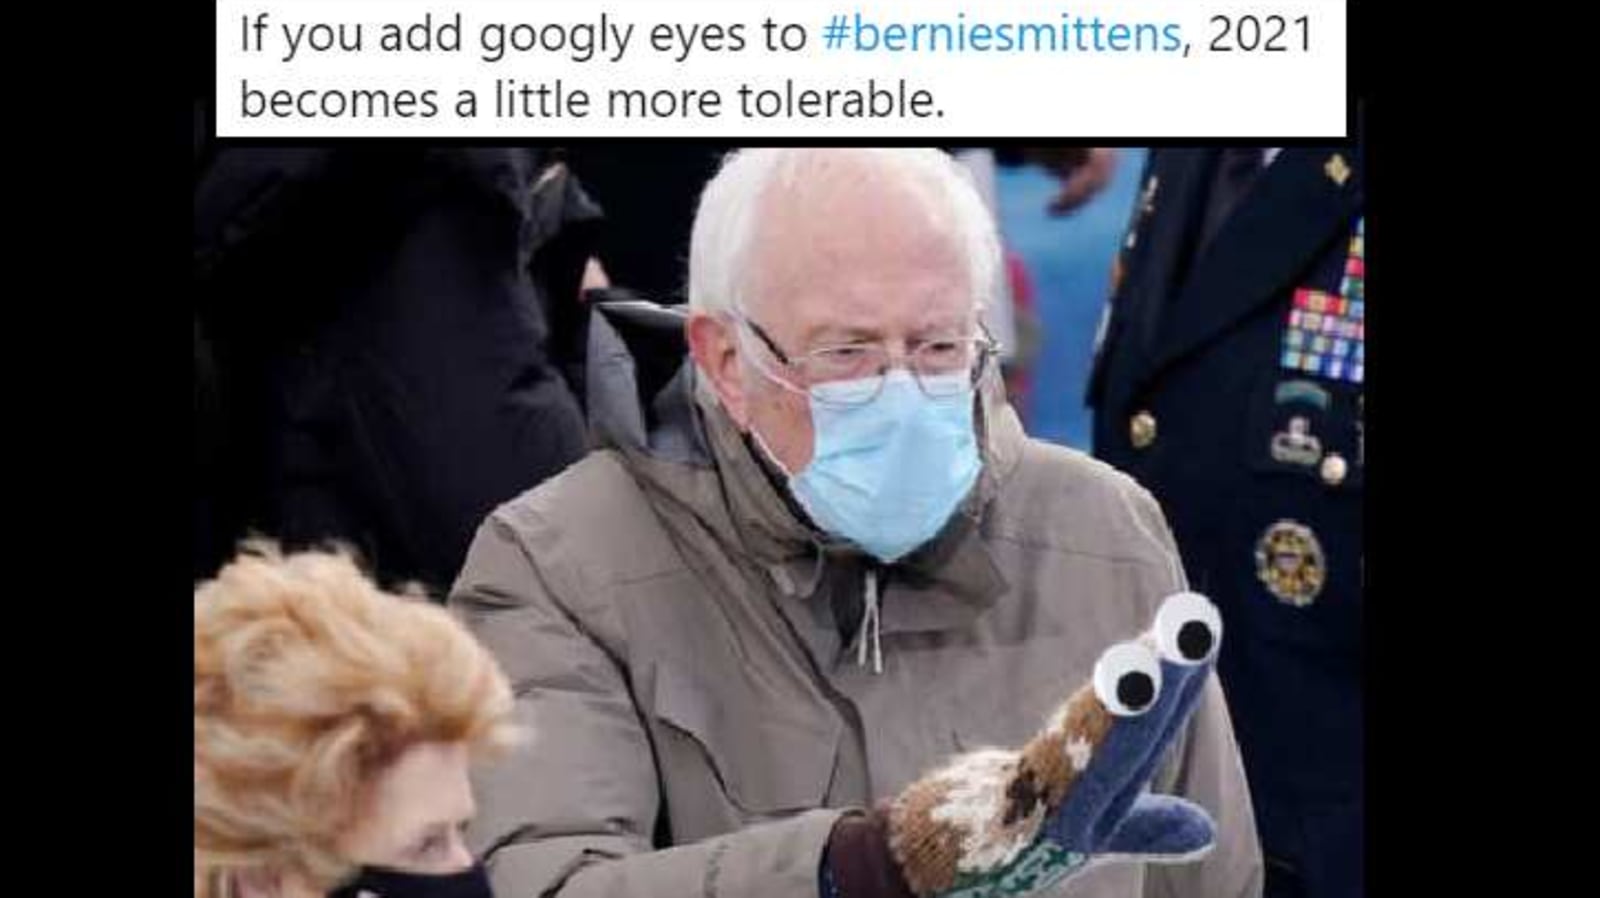 bernie-sanders-wins-inauguration-day-meme-fest-with-his-mittens-seen